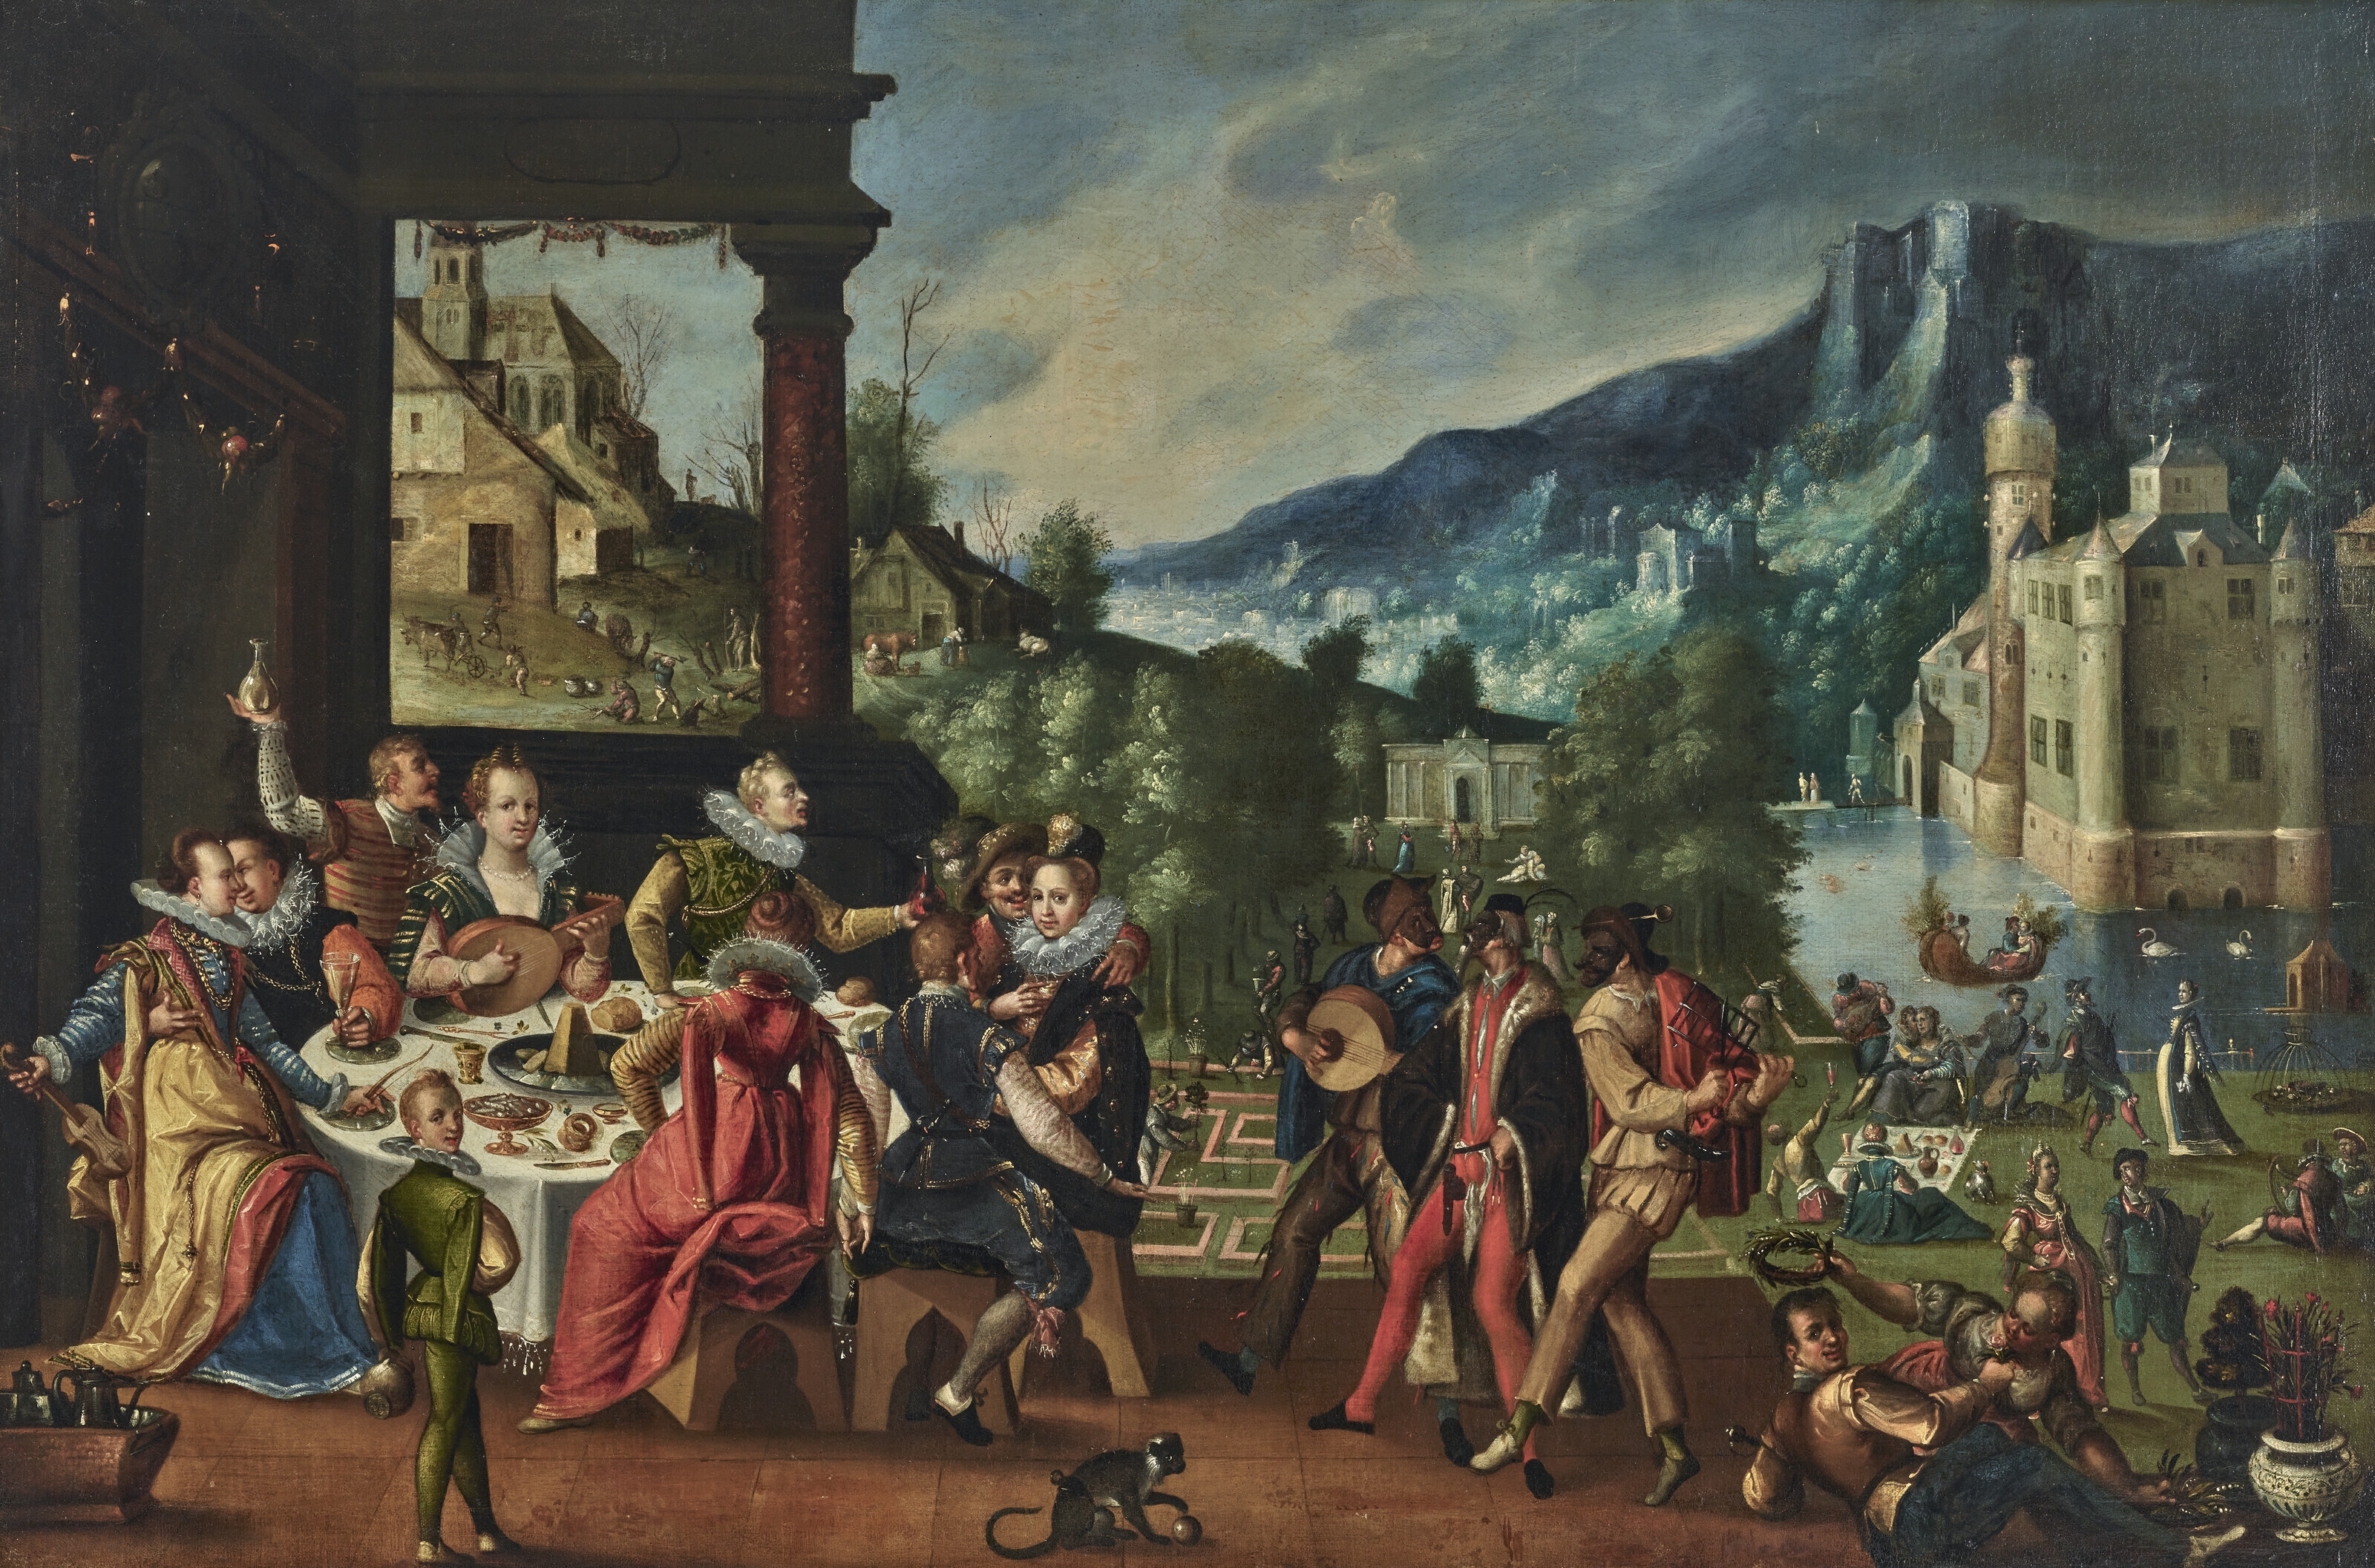 An elegant company at a feast with commedia dell'arte figures, revelers, a landscape with a castle beyond by Prague School, 17th Century, circa 1600